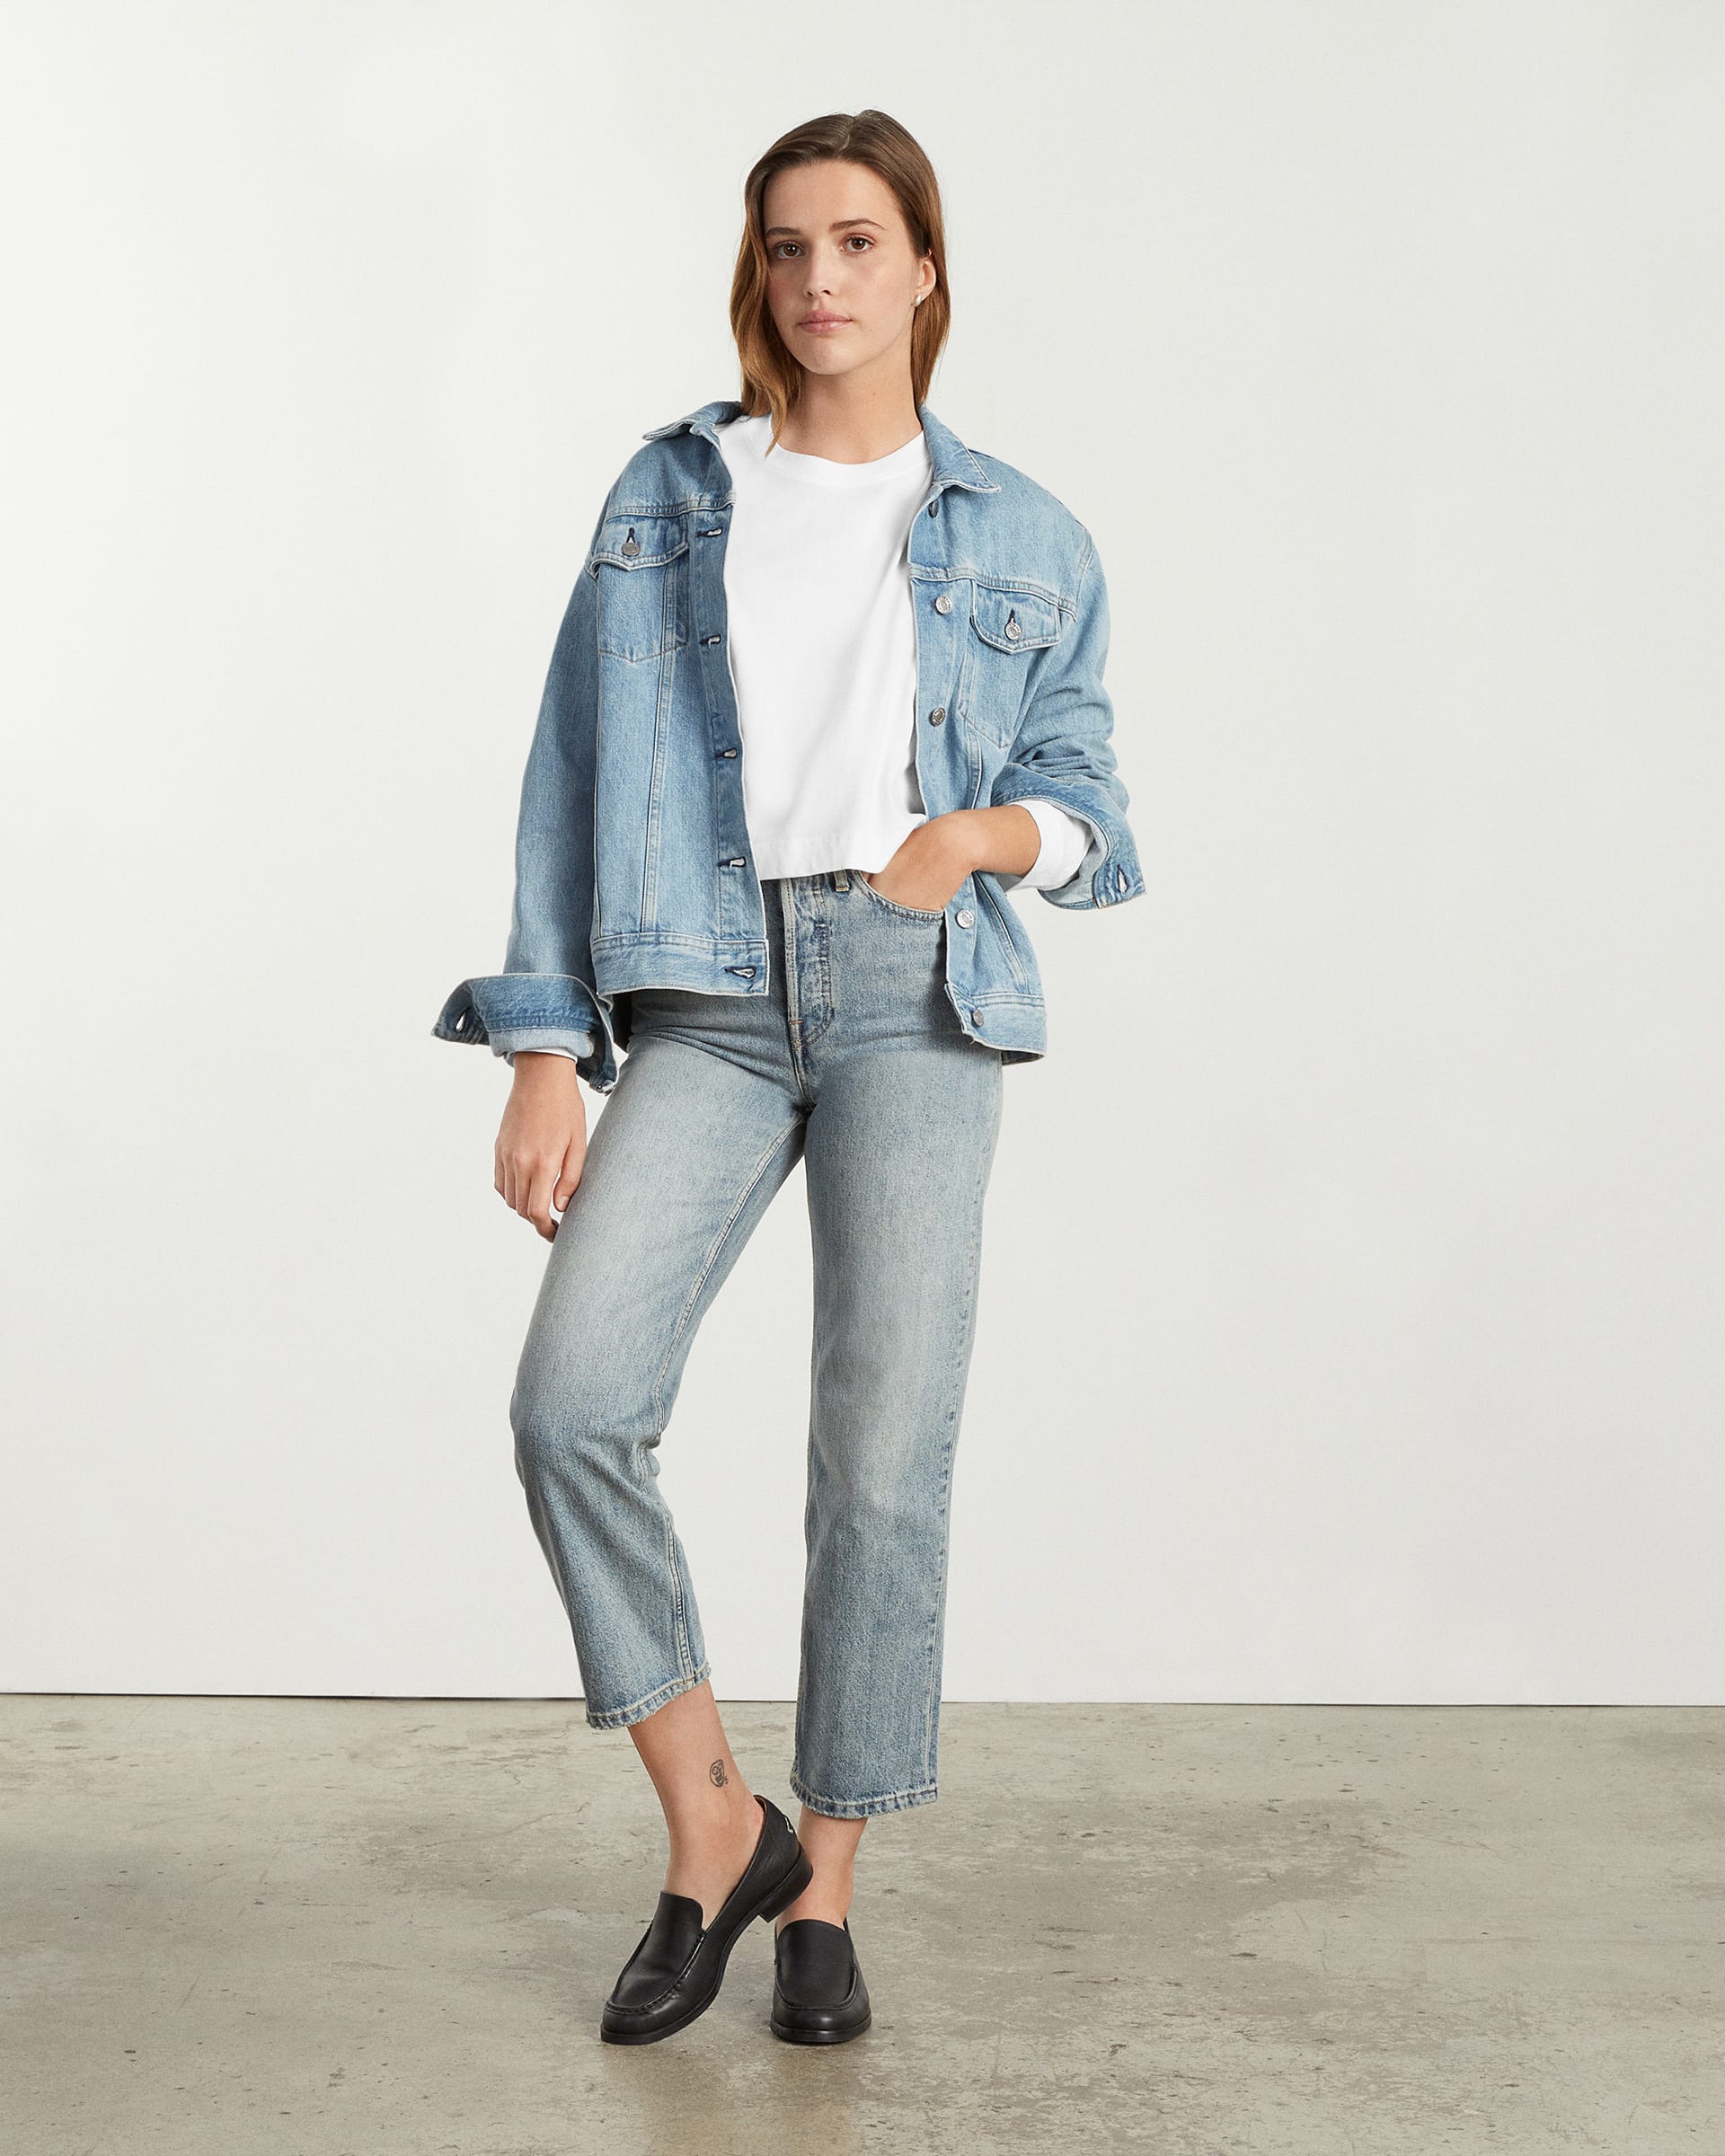 The Organic Cotton Cropped Long-Sleeve Crew White – Everlane